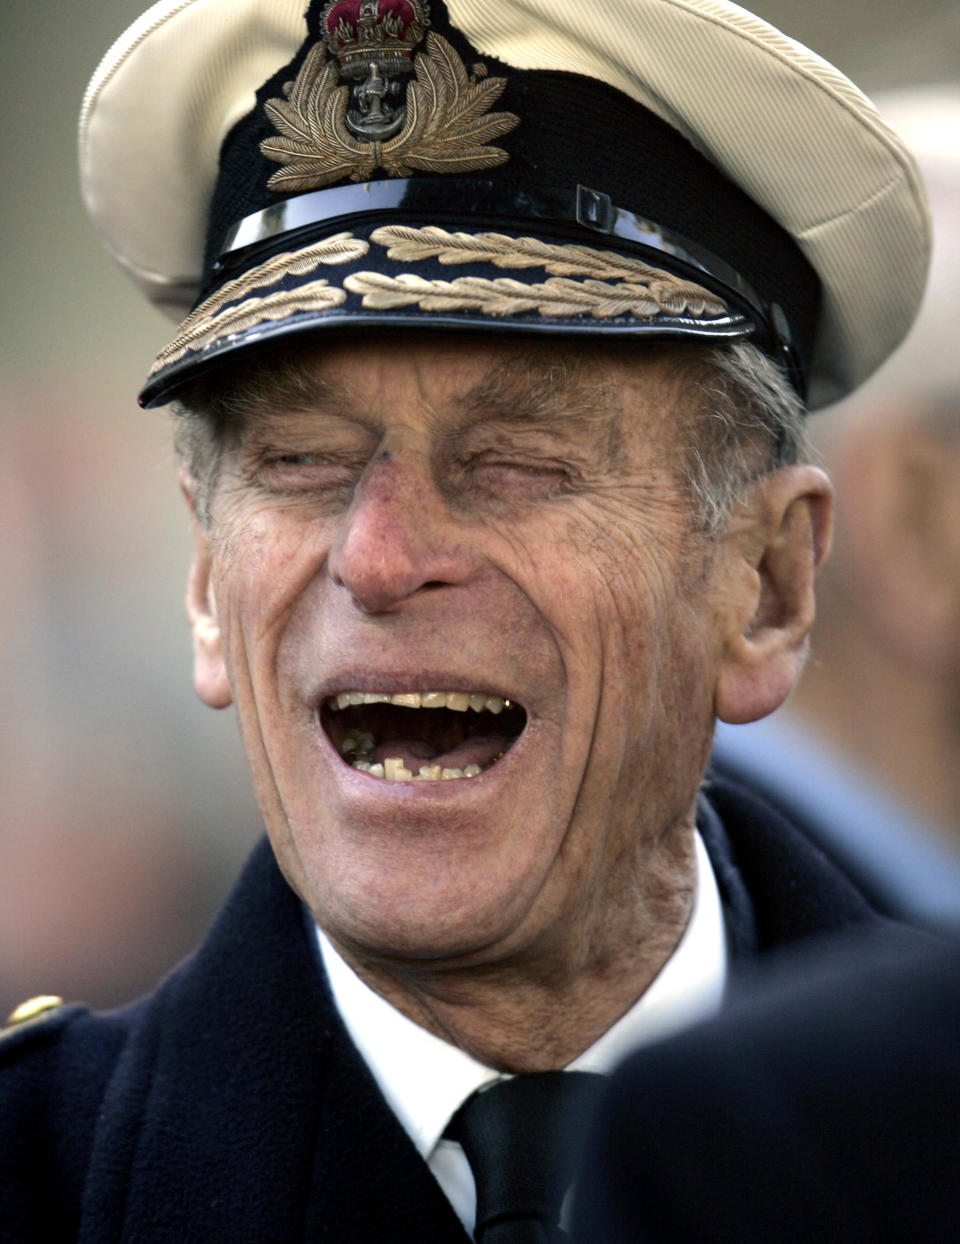 FILE - In this Nov. 9, 2006 file photo, Britain's Prince Philip shares a joke with a war veteran, following a ceremony for the Opening of the Field of Remembrance, on the grounds of the Westminster Abbey, in central London. Buckingham Palace says Prince Philip, husband of Queen Elizabeth II, has died aged 99. (AP Photo/Lefteris Pitarakis, File)